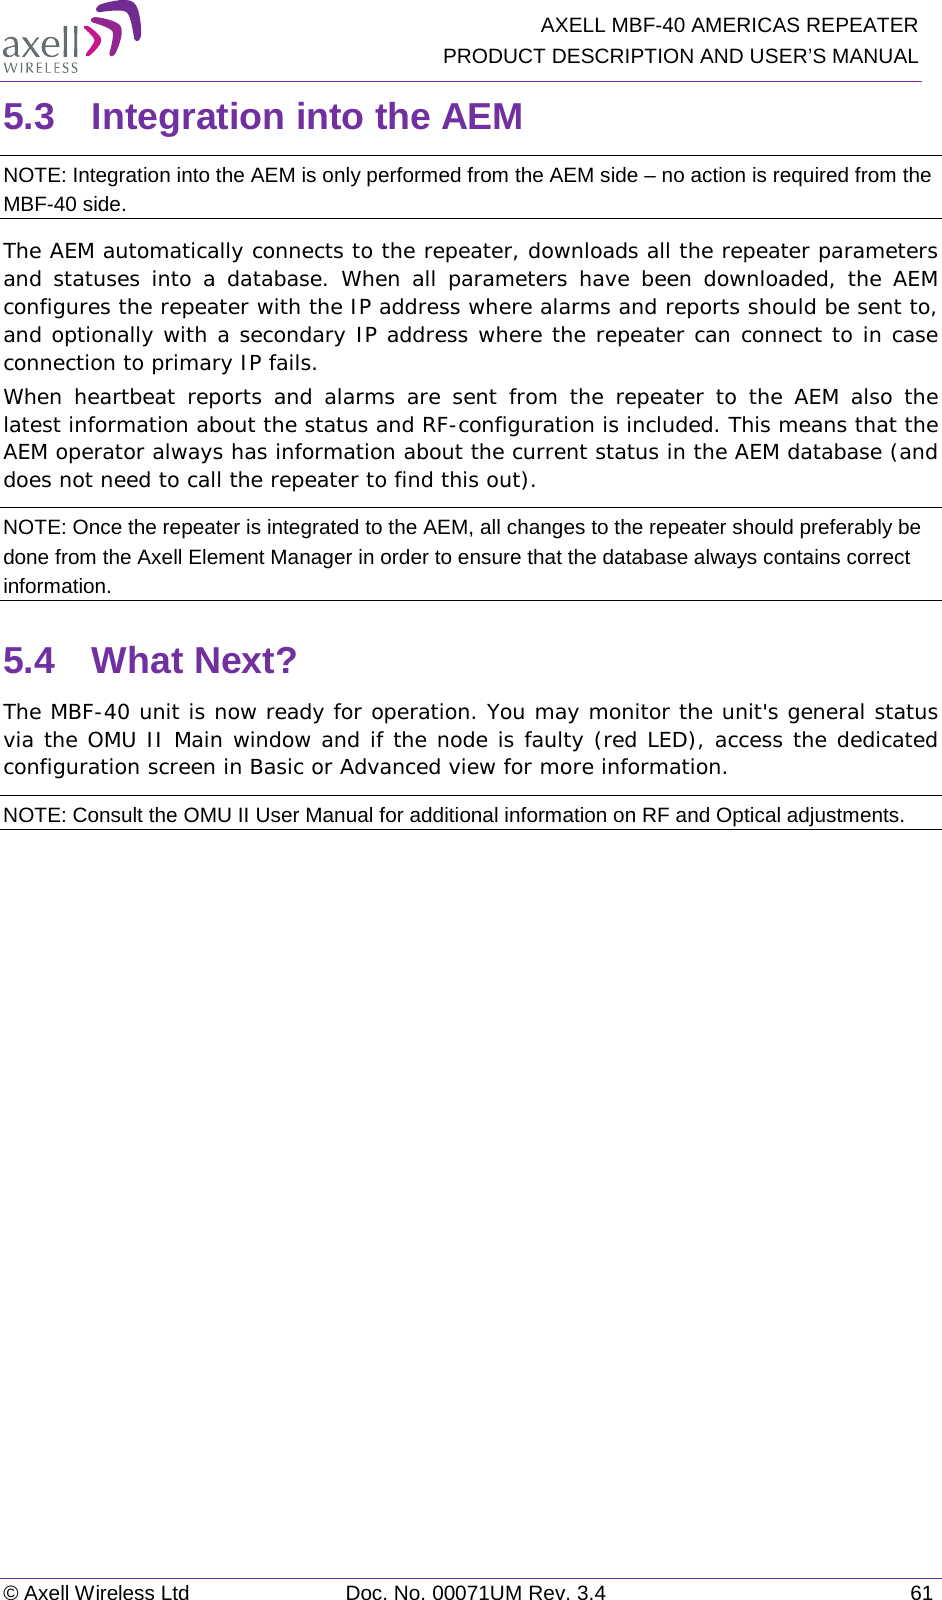   AXELL MBF-40 AMERICAS REPEATER PRODUCT DESCRIPTION AND USER’S MANUAL © Axell Wireless Ltd Doc. No. 00071UM Rev. 3.4 61 5.3  Integration into the AEM NOTE: Integration into the AEM is only performed from the AEM side – no action is required from the MBF-40 side. The AEM automatically connects to the repeater, downloads all the repeater parameters and statuses into a database. When all parameters have been downloaded, the AEM configures the repeater with the IP address where alarms and reports should be sent to, and optionally with a secondary IP address where the repeater can connect to in case connection to primary IP fails. When heartbeat reports and alarms are sent from the repeater to the AEM also the latest information about the status and RF-configuration is included. This means that the AEM operator always has information about the current status in the AEM database (and does not need to call the repeater to find this out). NOTE: Once the repeater is integrated to the AEM, all changes to the repeater should preferably be done from the Axell Element Manager in order to ensure that the database always contains correct information. 5.4  What Next? The MBF-40 unit is now ready for operation. You may monitor the unit&apos;s general status via the OMU II Main window and if the node is faulty (red LED), access the dedicated configuration screen in Basic or Advanced view for more information. NOTE: Consult the OMU II User Manual for additional information on RF and Optical adjustments. 